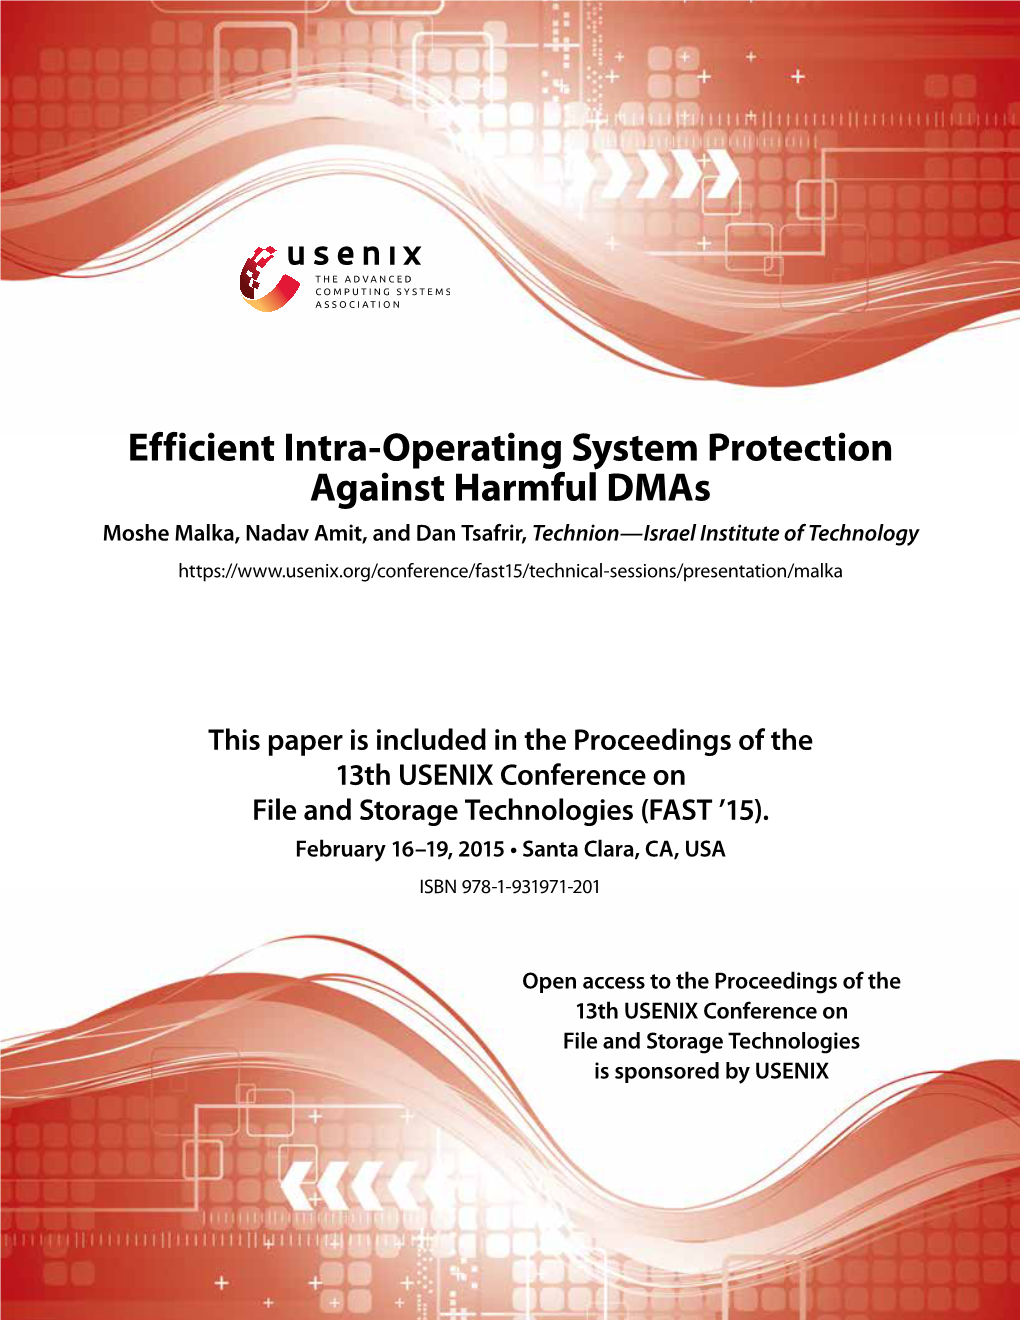 Efficient Intra-Operating System Protection Against Harmful Dmas